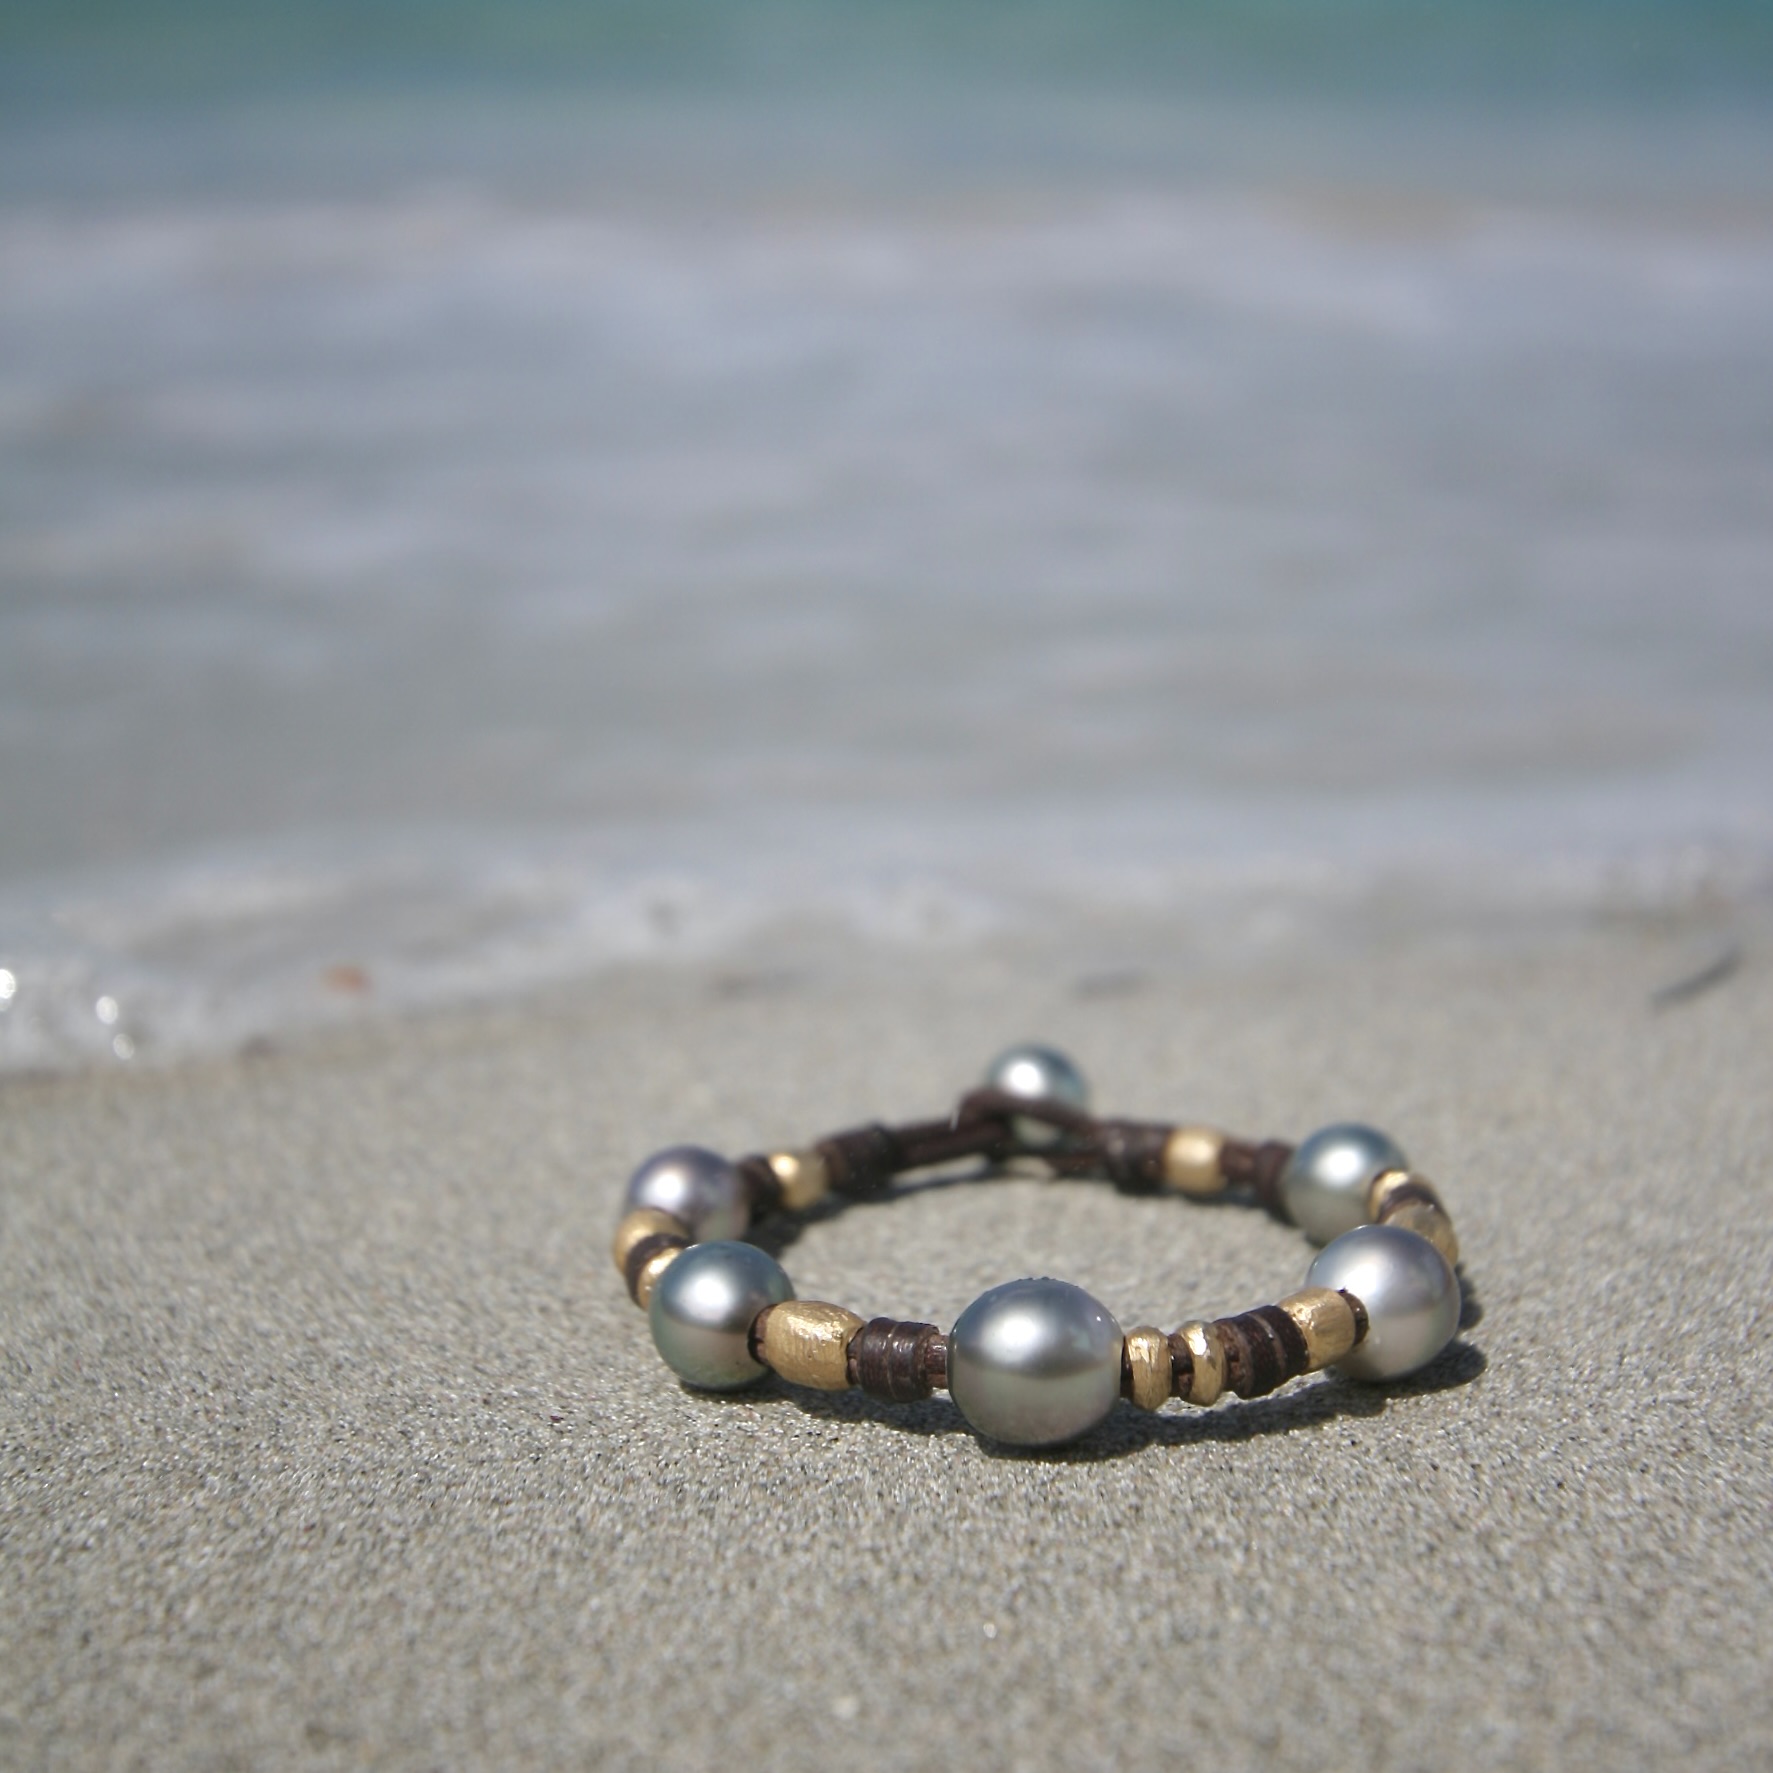 pearl and leather Saint barth bracelet